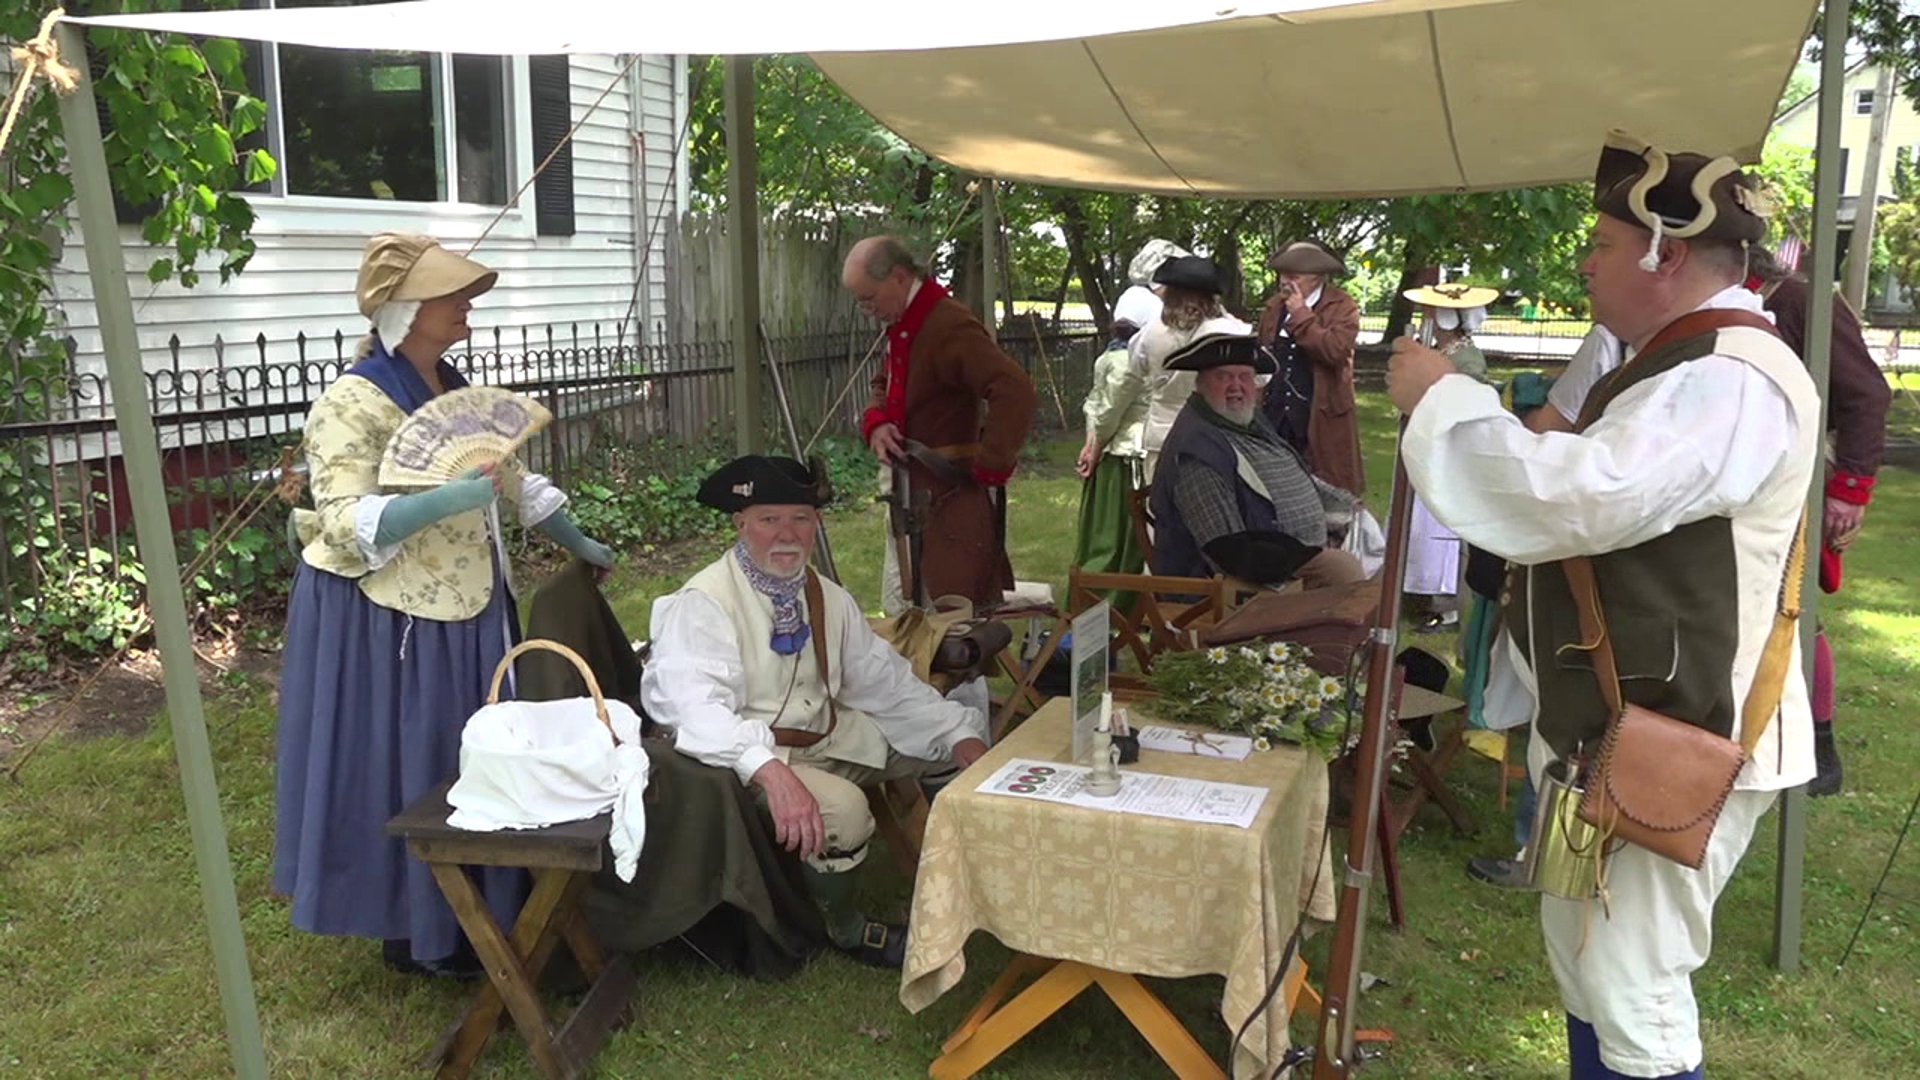 The West Pittston Historical Society held its annual First to Fall event Sunday at the Jenkins Harding Cemetery along Linden Street.